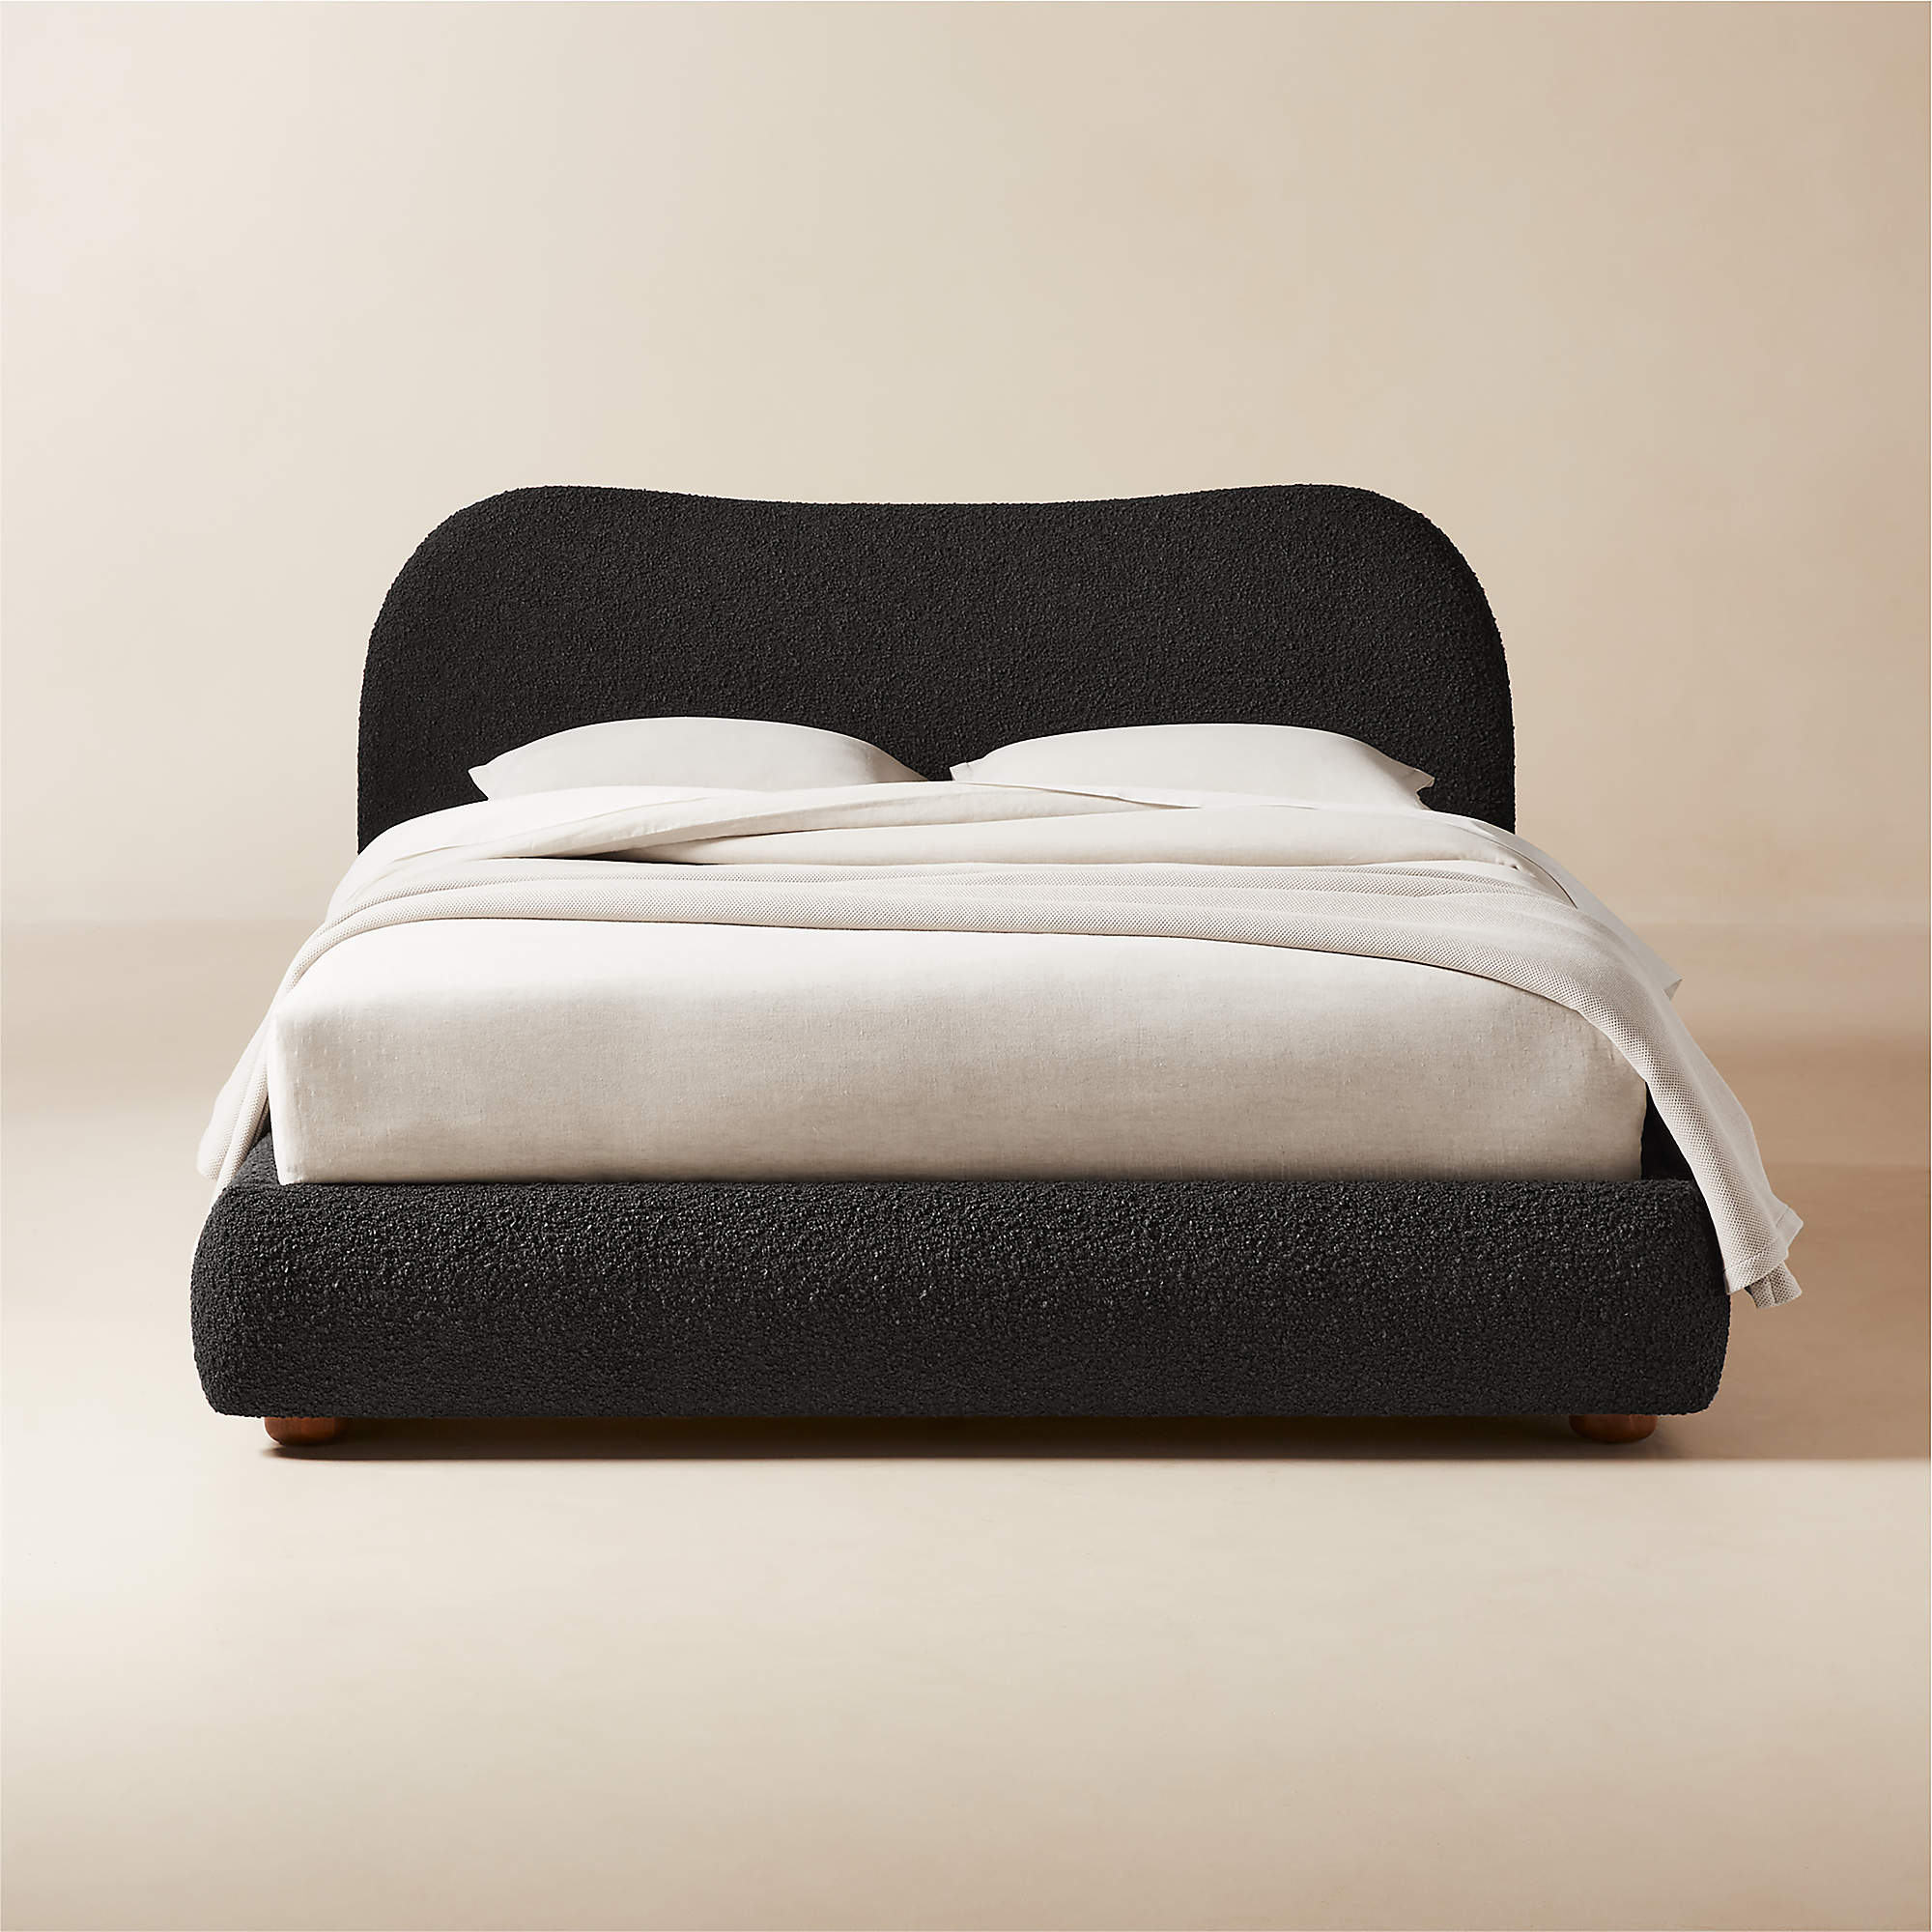 Diana Charcoal Black Upholstered Queen Bed + Reviews | CB2 Canada